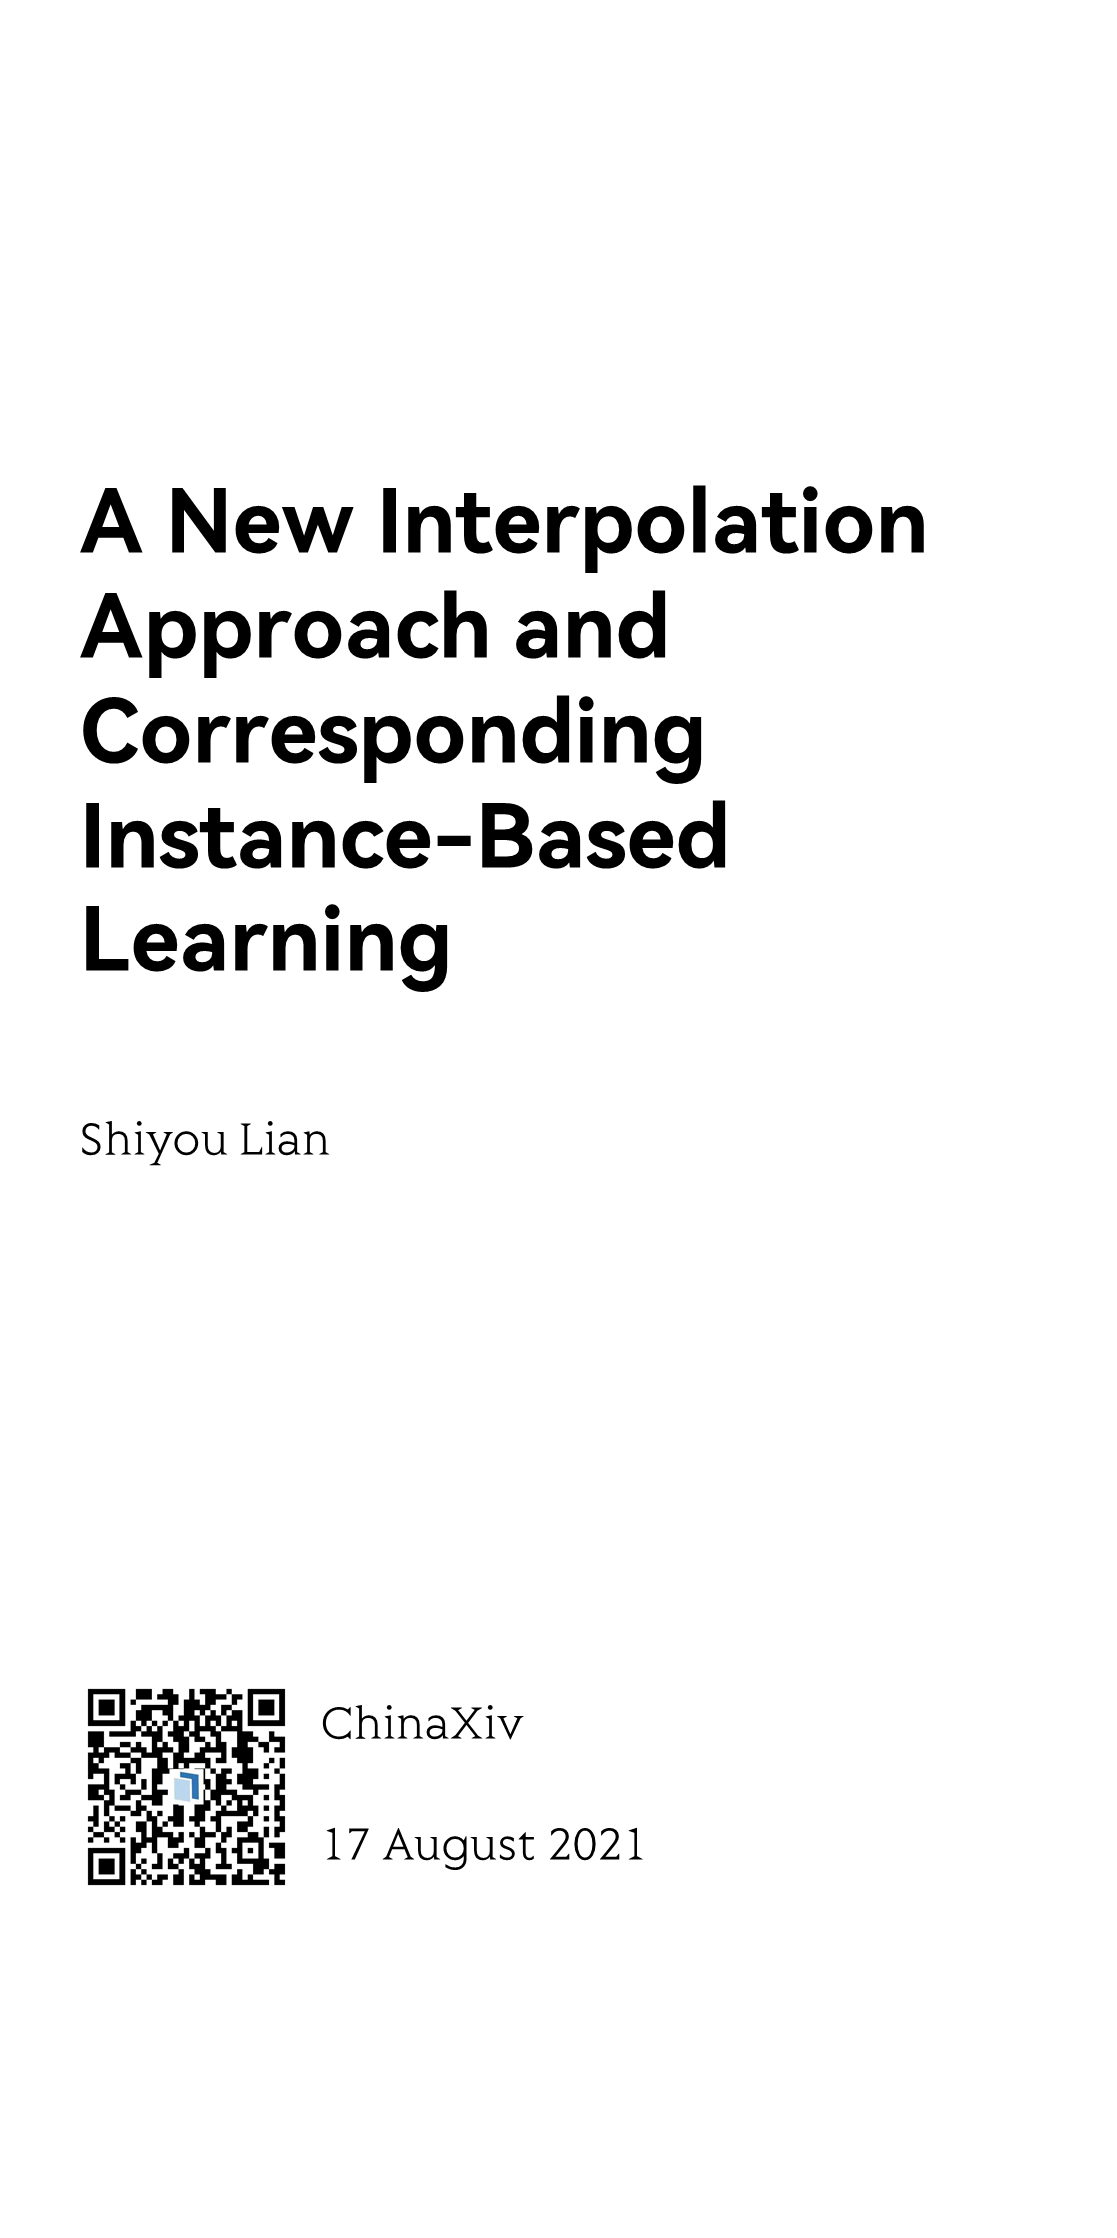 A New Interpolation Approach and Corresponding Instance-Based Learning_1